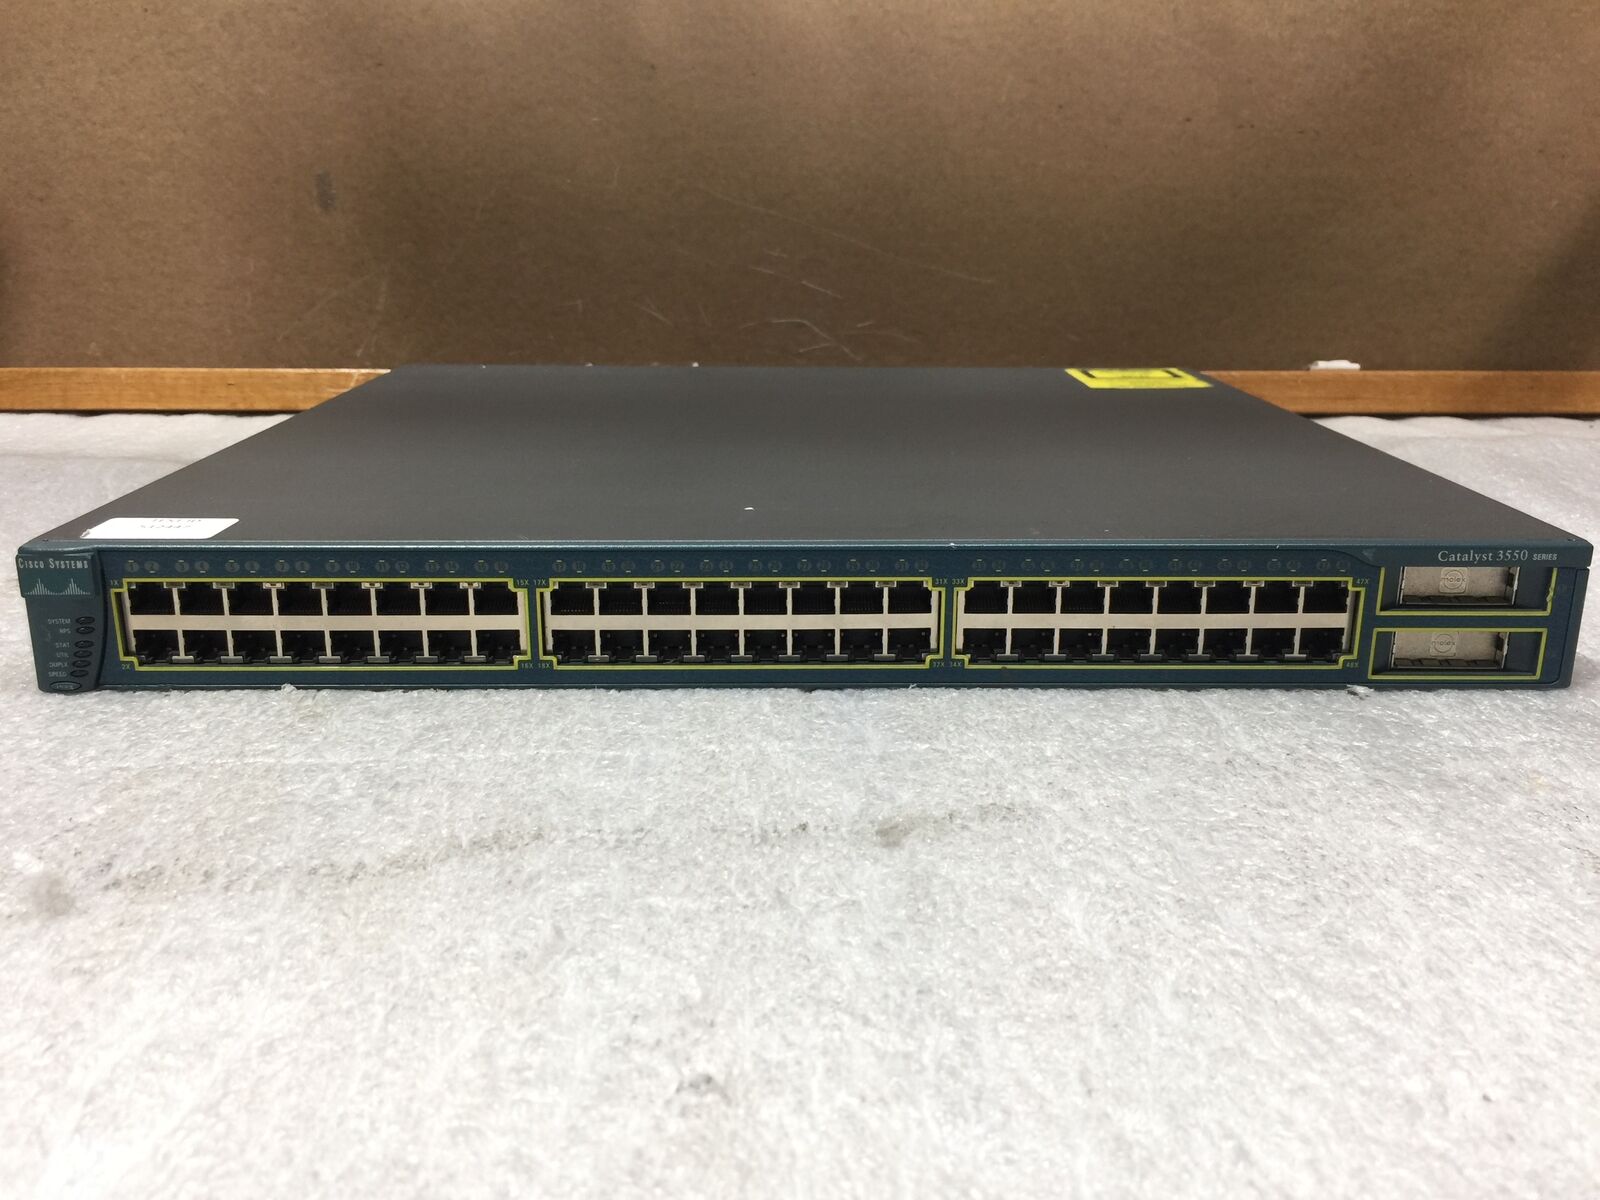 Cisco Catalyst 3550 WS-C3550-48-SMI Ethernet Switch, Tested/Working/Reset